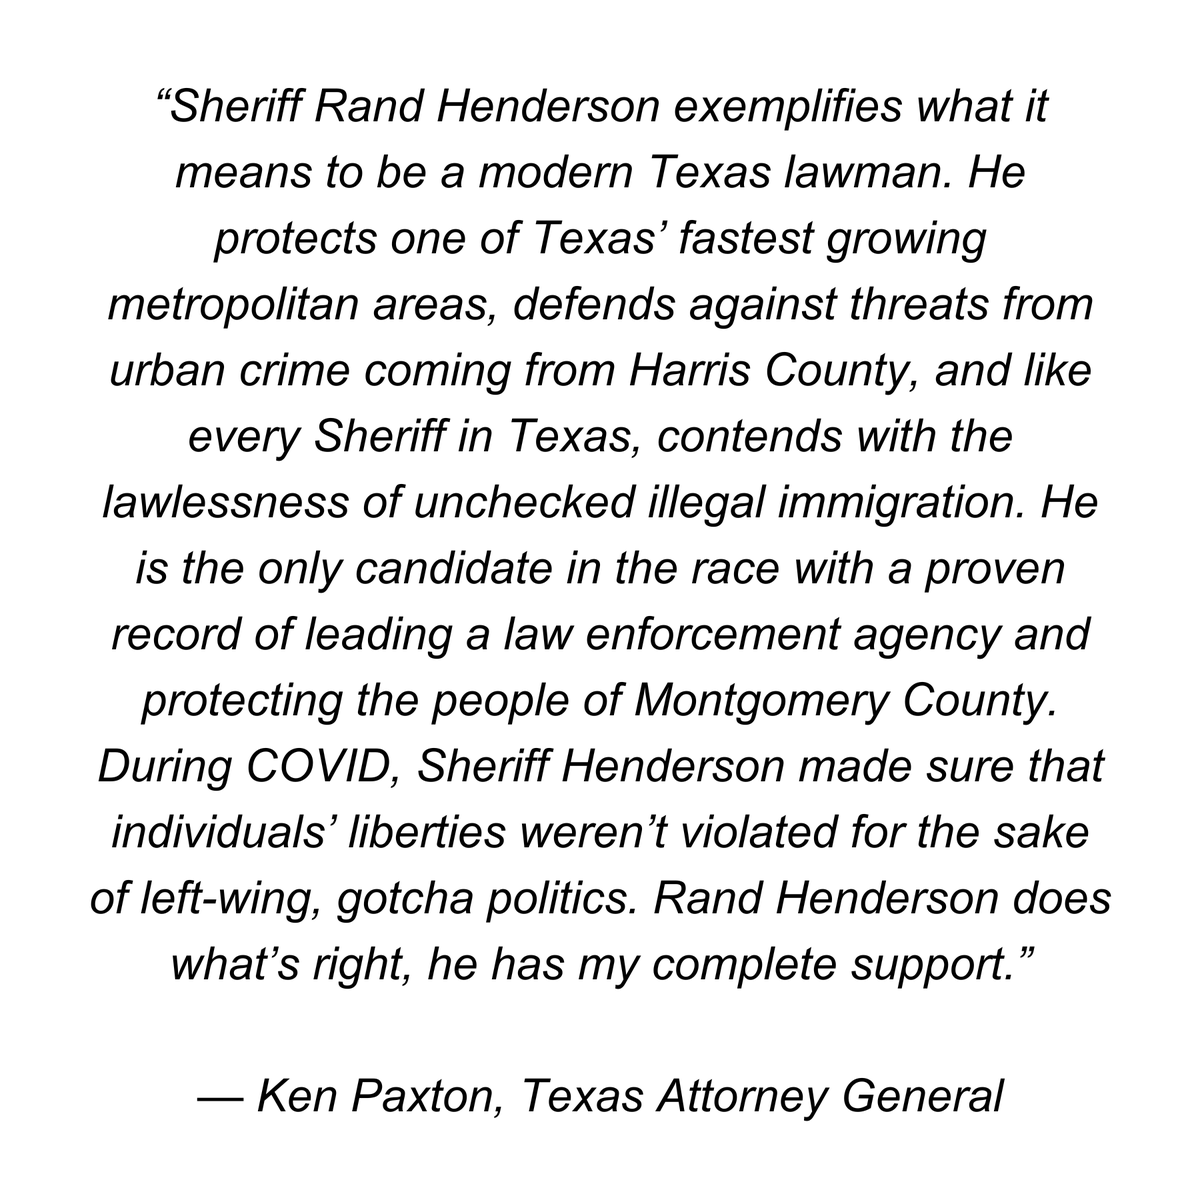 “Sheriff Rand Henderson exemplifies what it means to be a modern Texas lawman...Rand Henderson does what’s right, he has my complete support.” — @KenPaxtonTX, Texas Attorney General